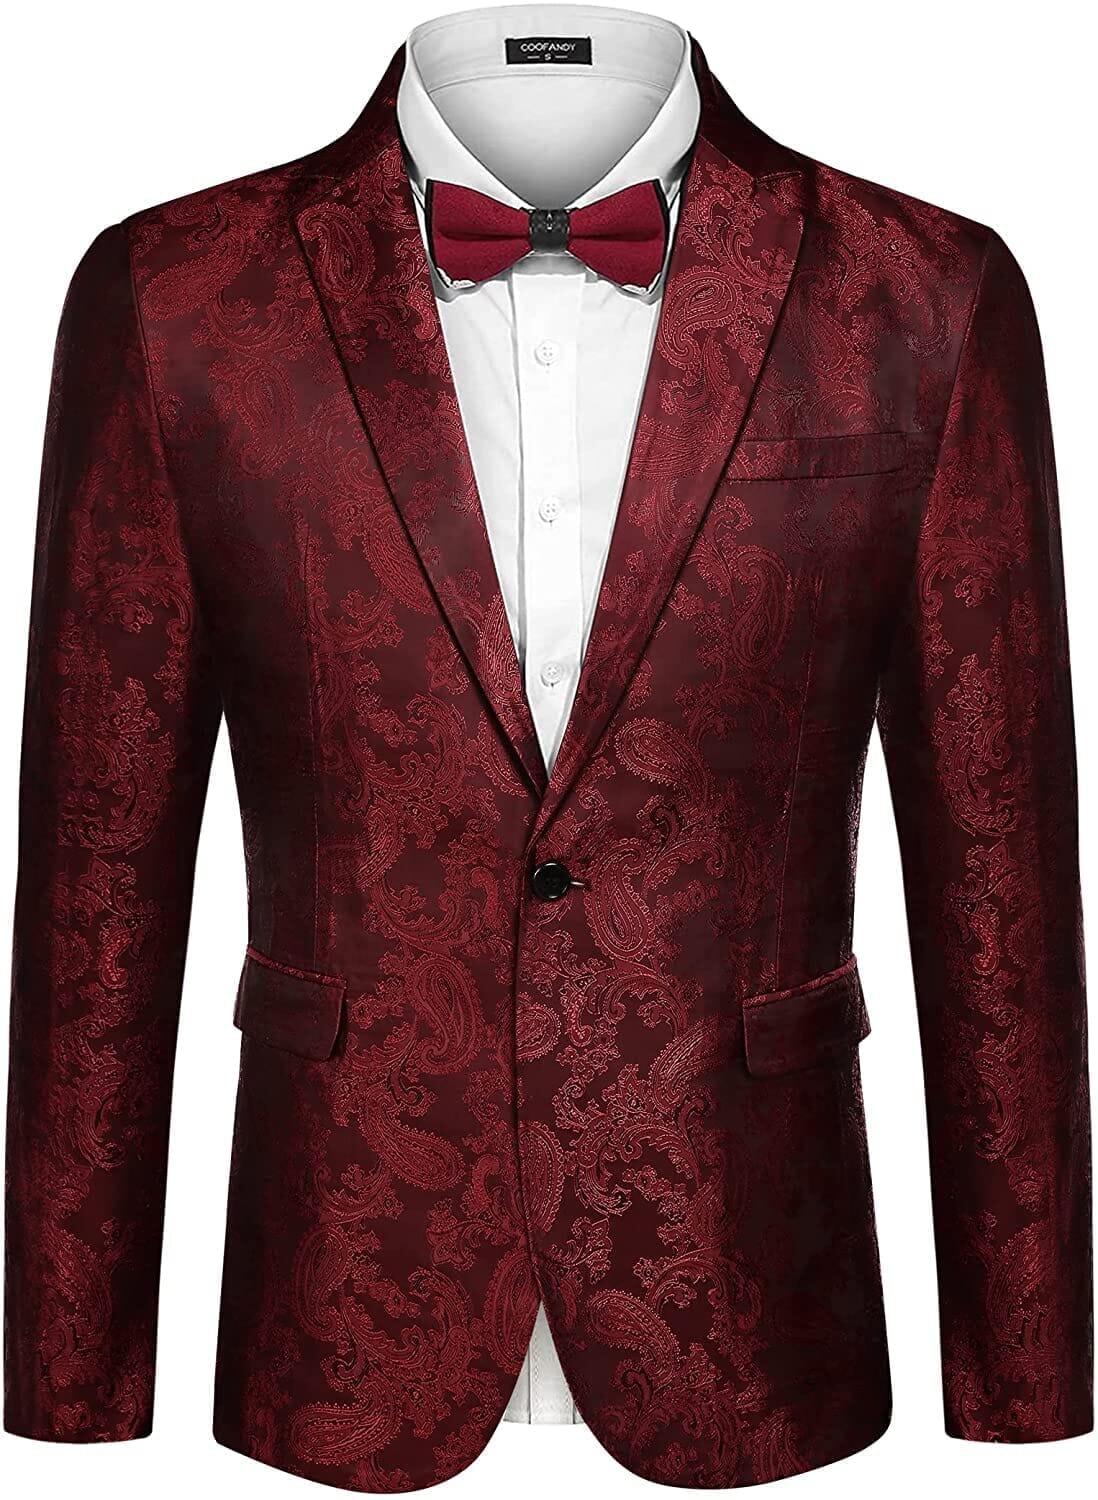 Coofandy Lapel Stylish Suit Jacket (US Only) Blazer coofandy Red S 